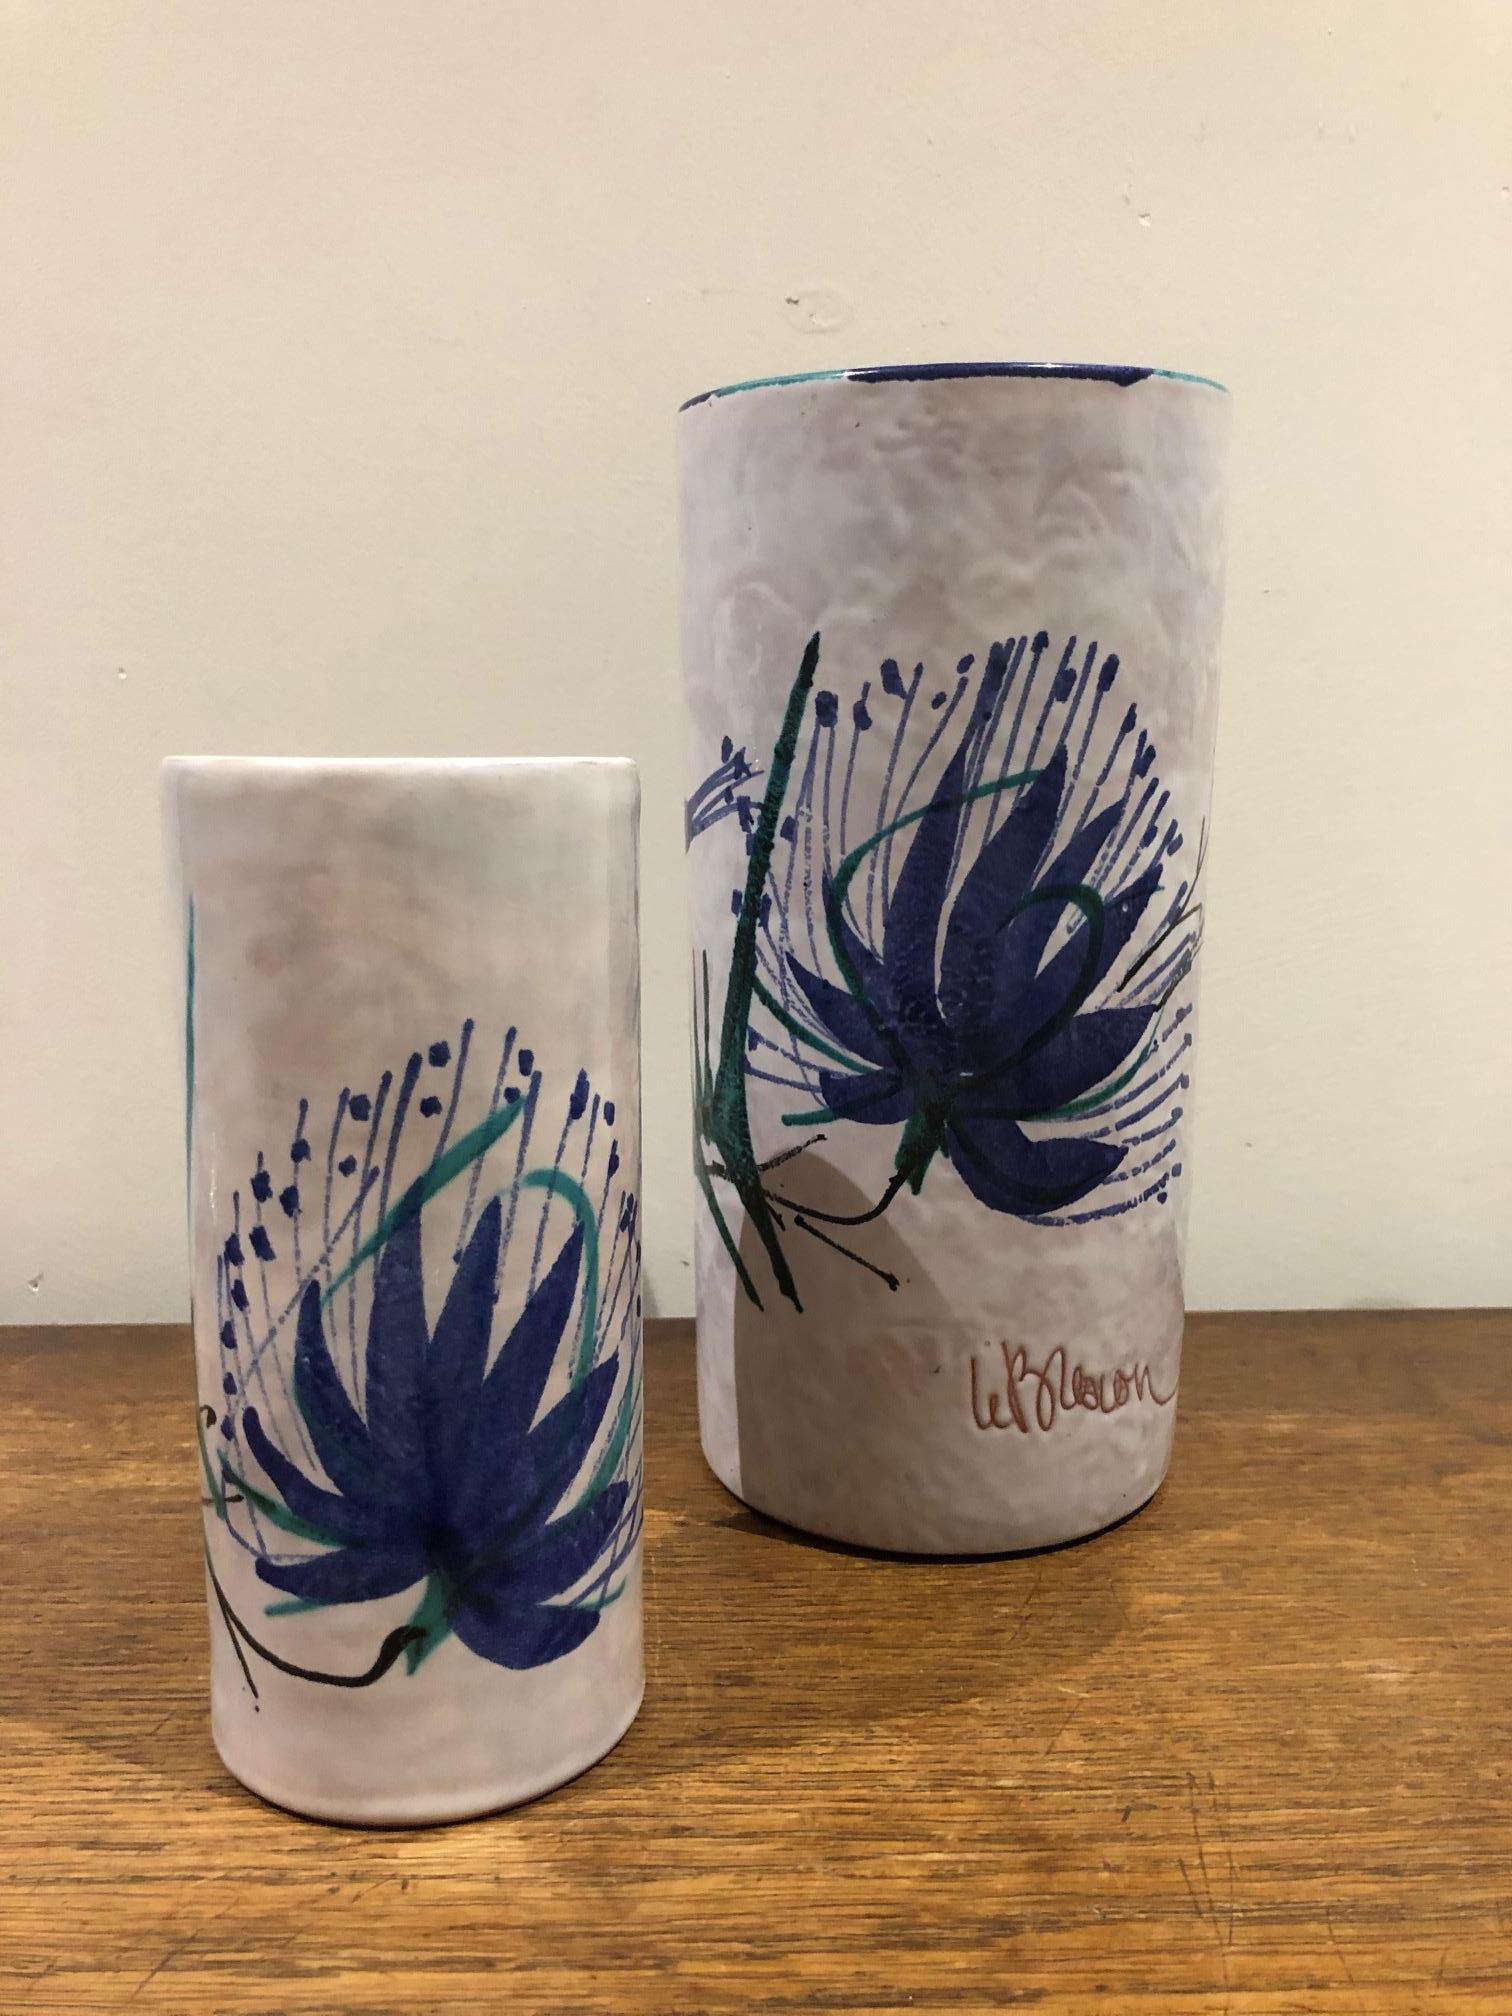 Pair of ceramic vases produced in Vallauris in the 1950s, hand painted by Le Brescon.